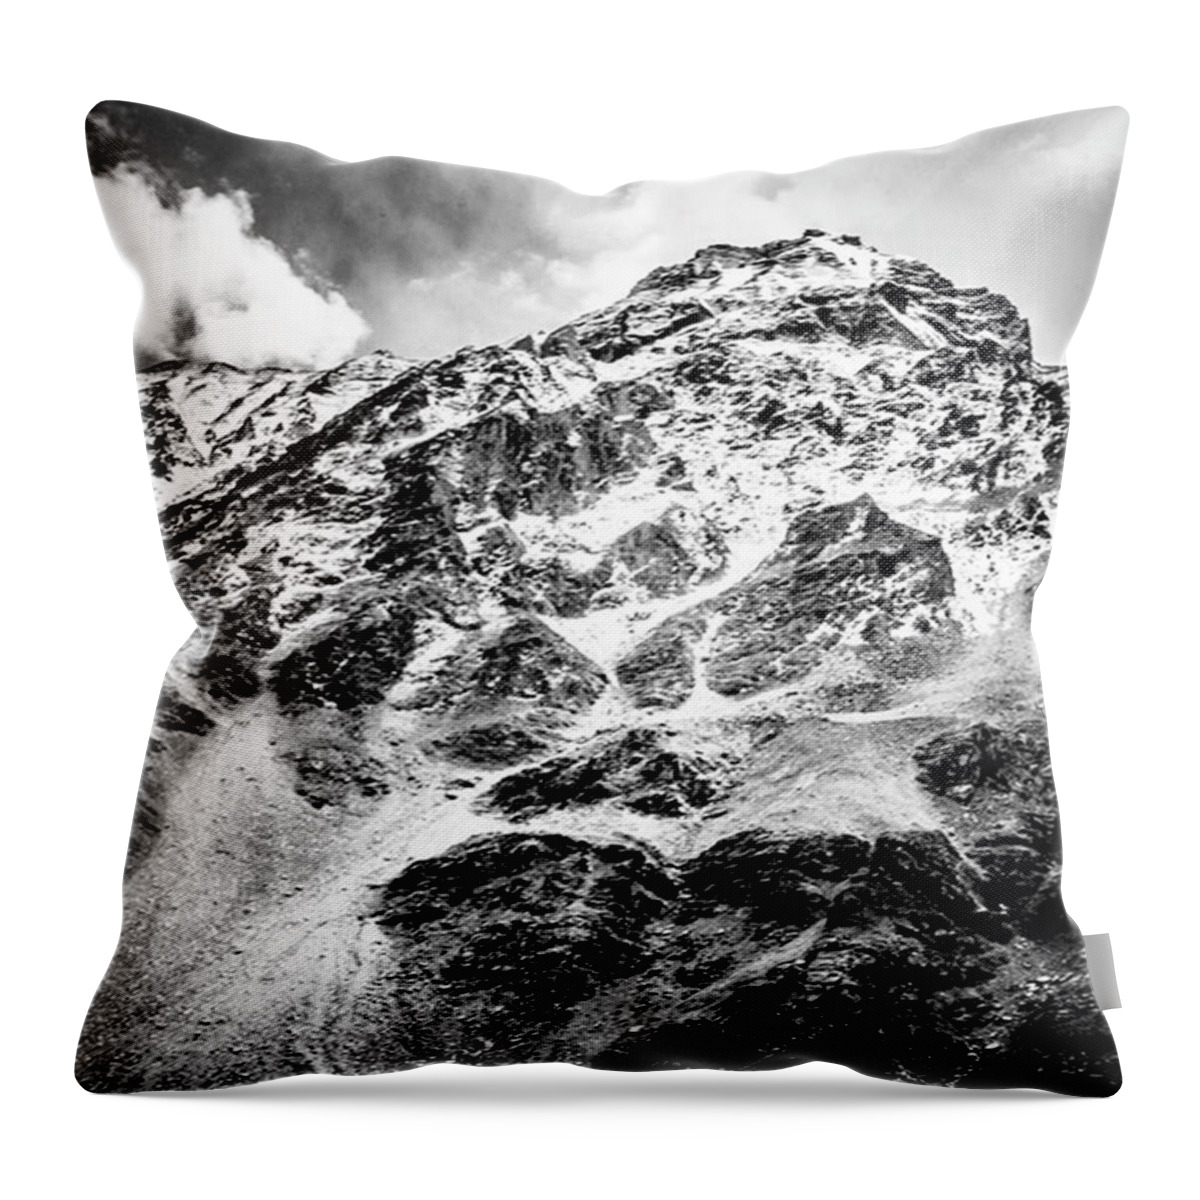 Mountains Throw Pillow featuring the photograph Mountains Evoke An Adrenaline Rush by Aleck Cartwright